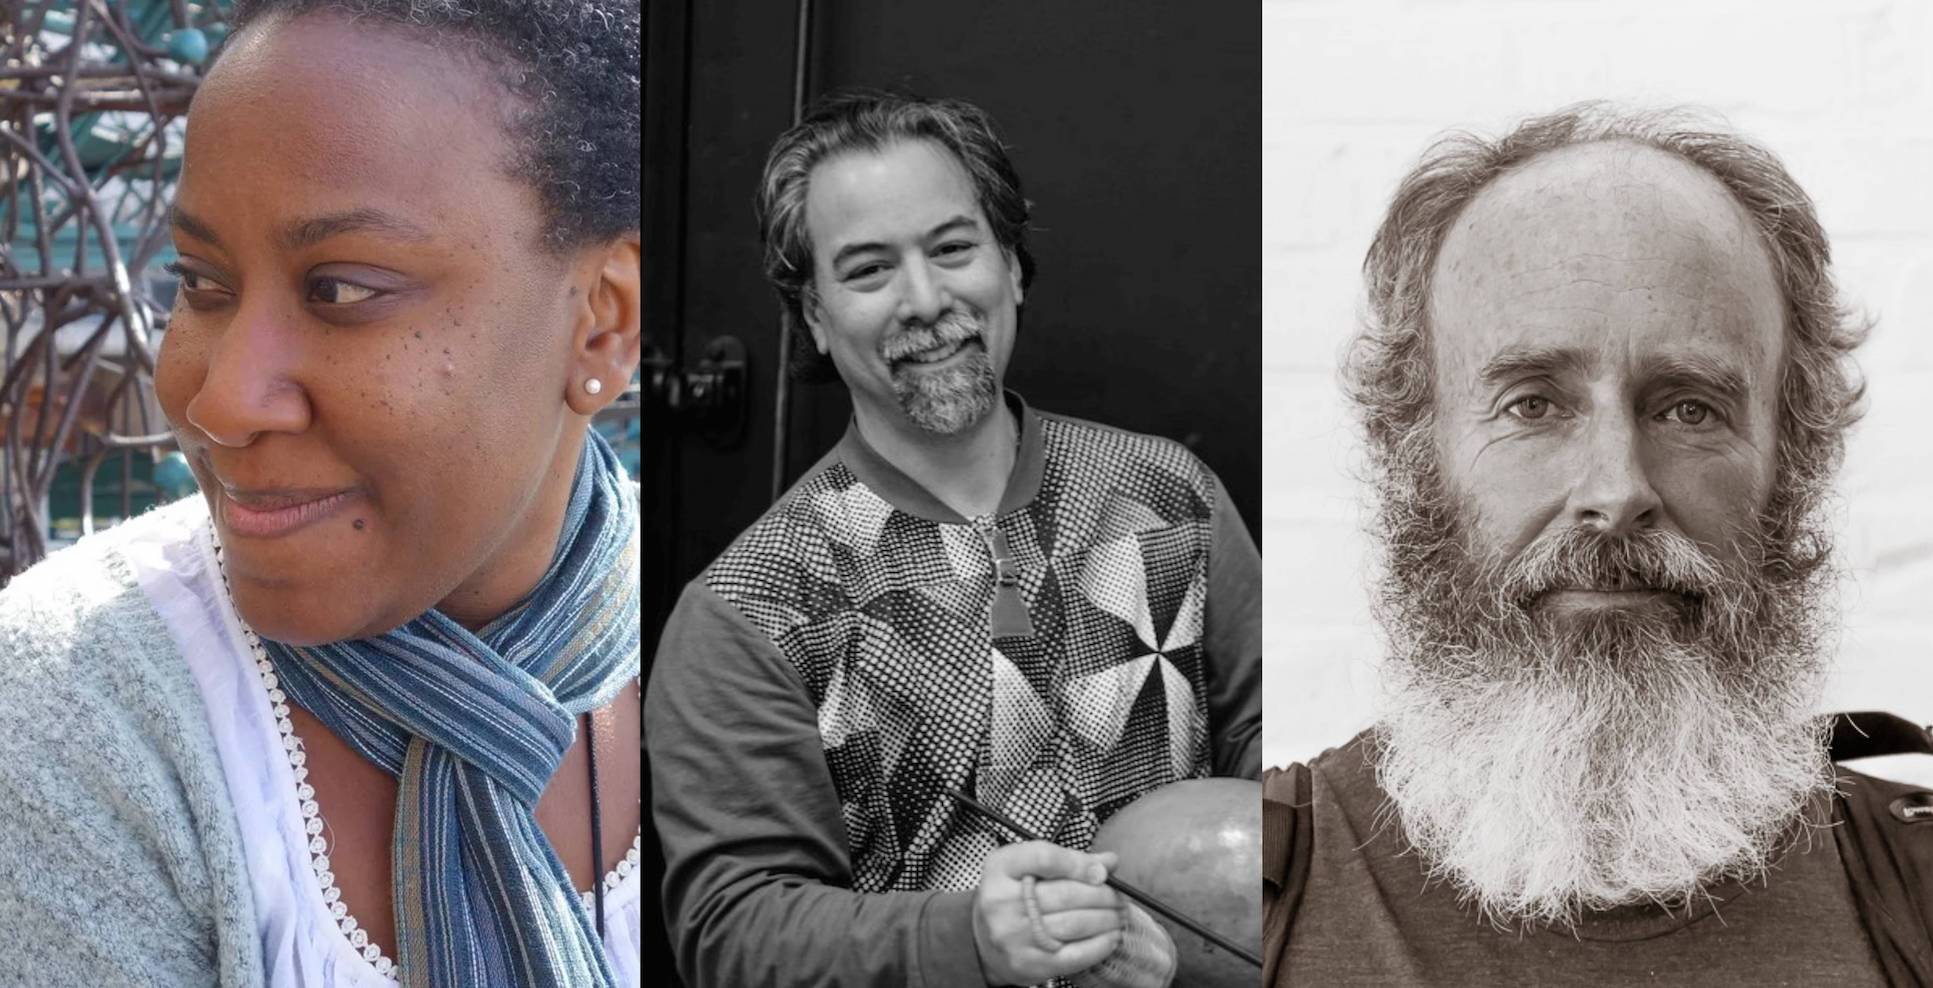 Individual photos of Latrelle Bright, a black woman wearing a grey top and a scarf looking to the left; Jason Finkelman, a man looking at the camera, with short hair and facial hair; and Deke Weaver, a man with a long white beard staring straight at the camera